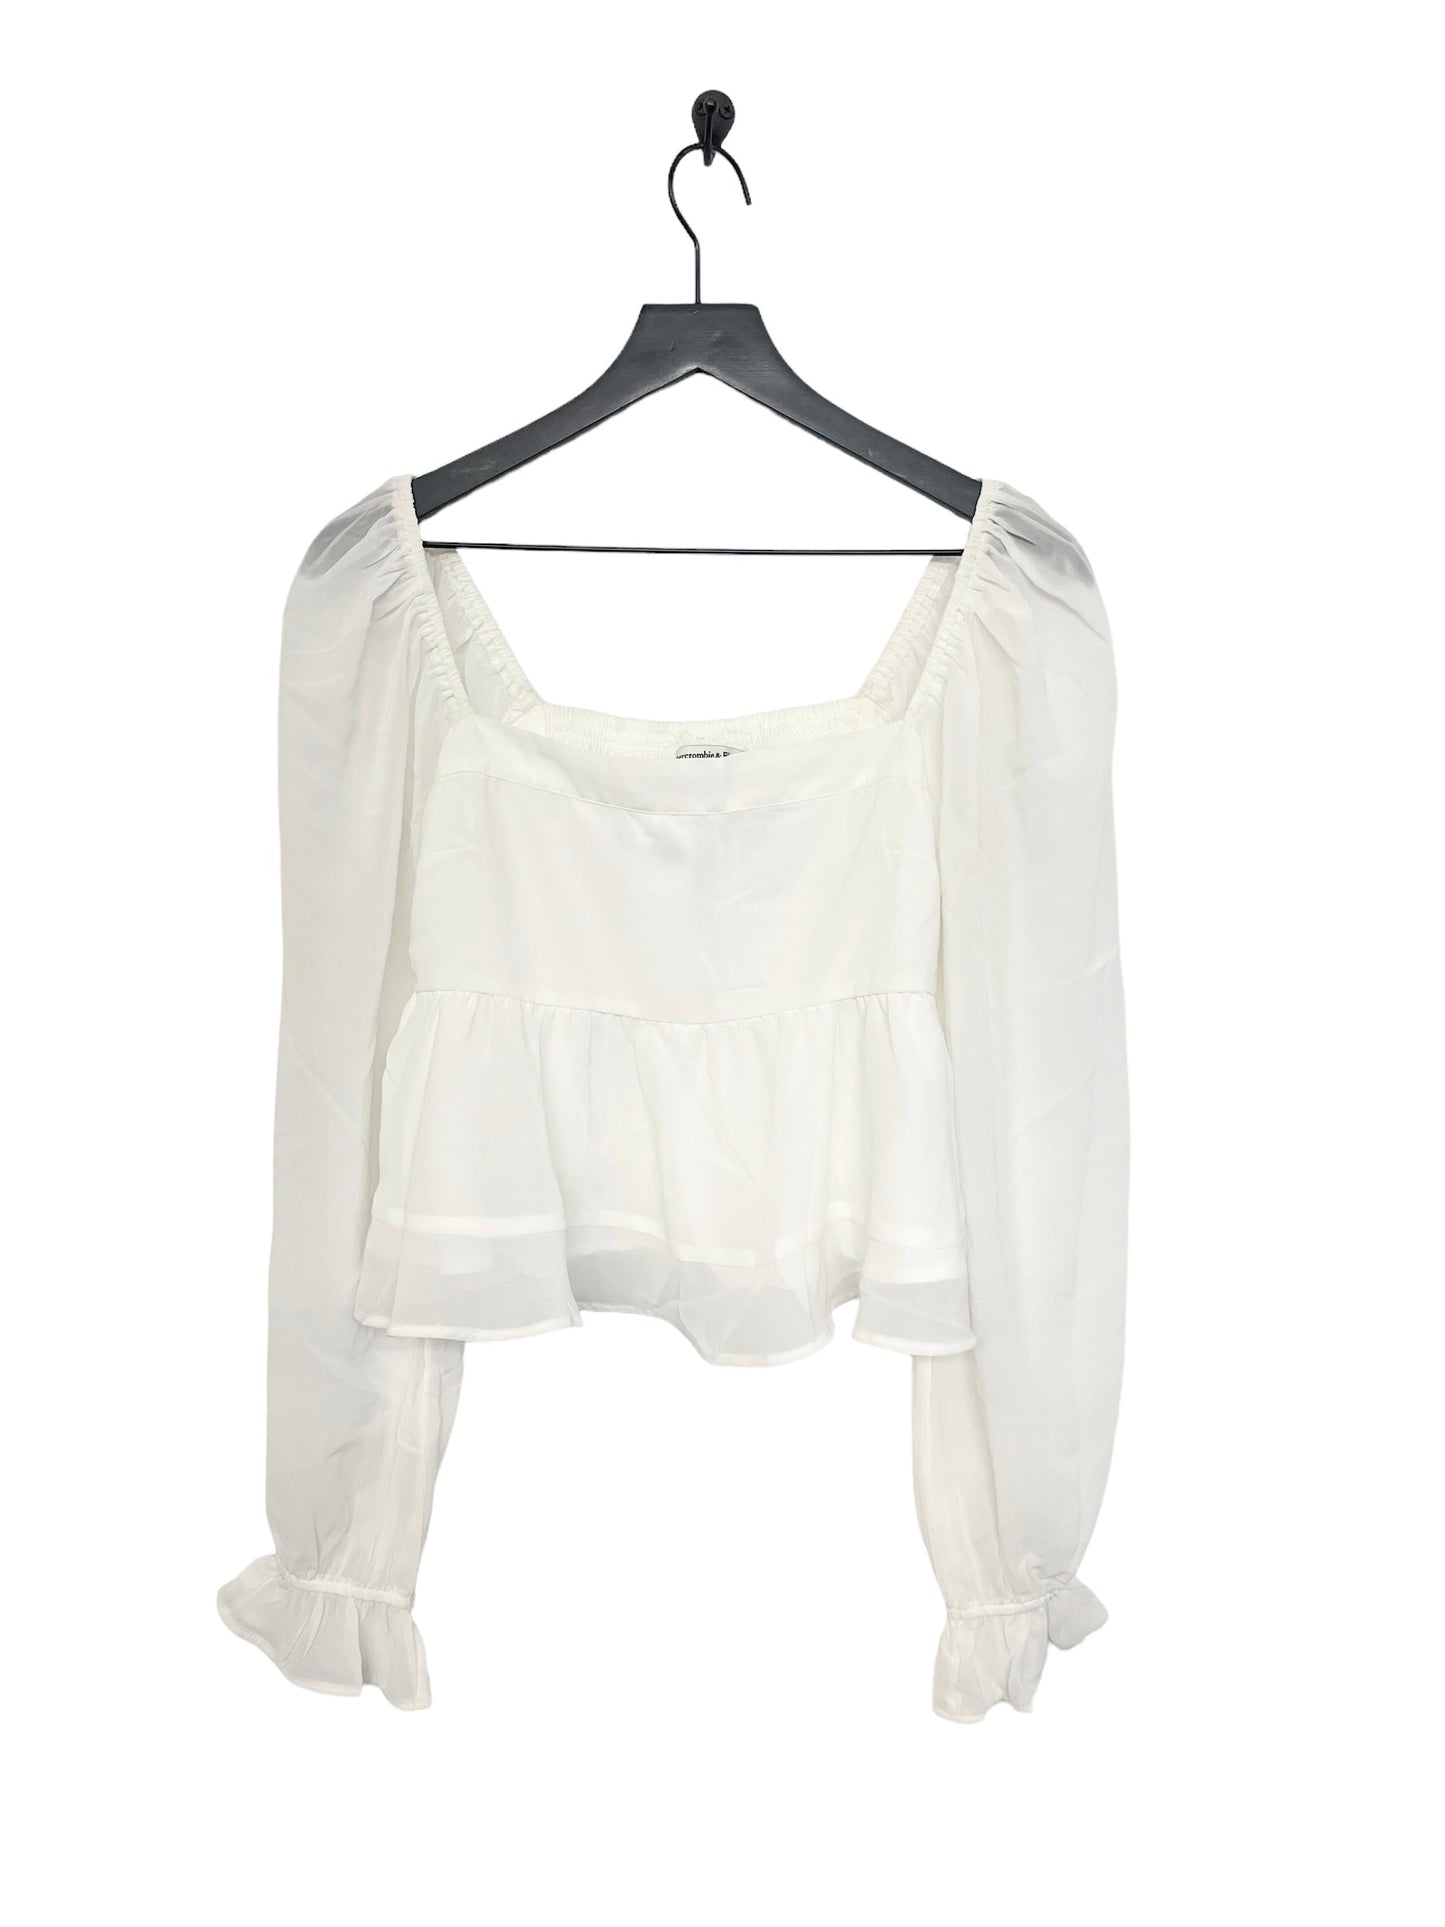 White Top Long Sleeve Abercrombie And Fitch, Size M